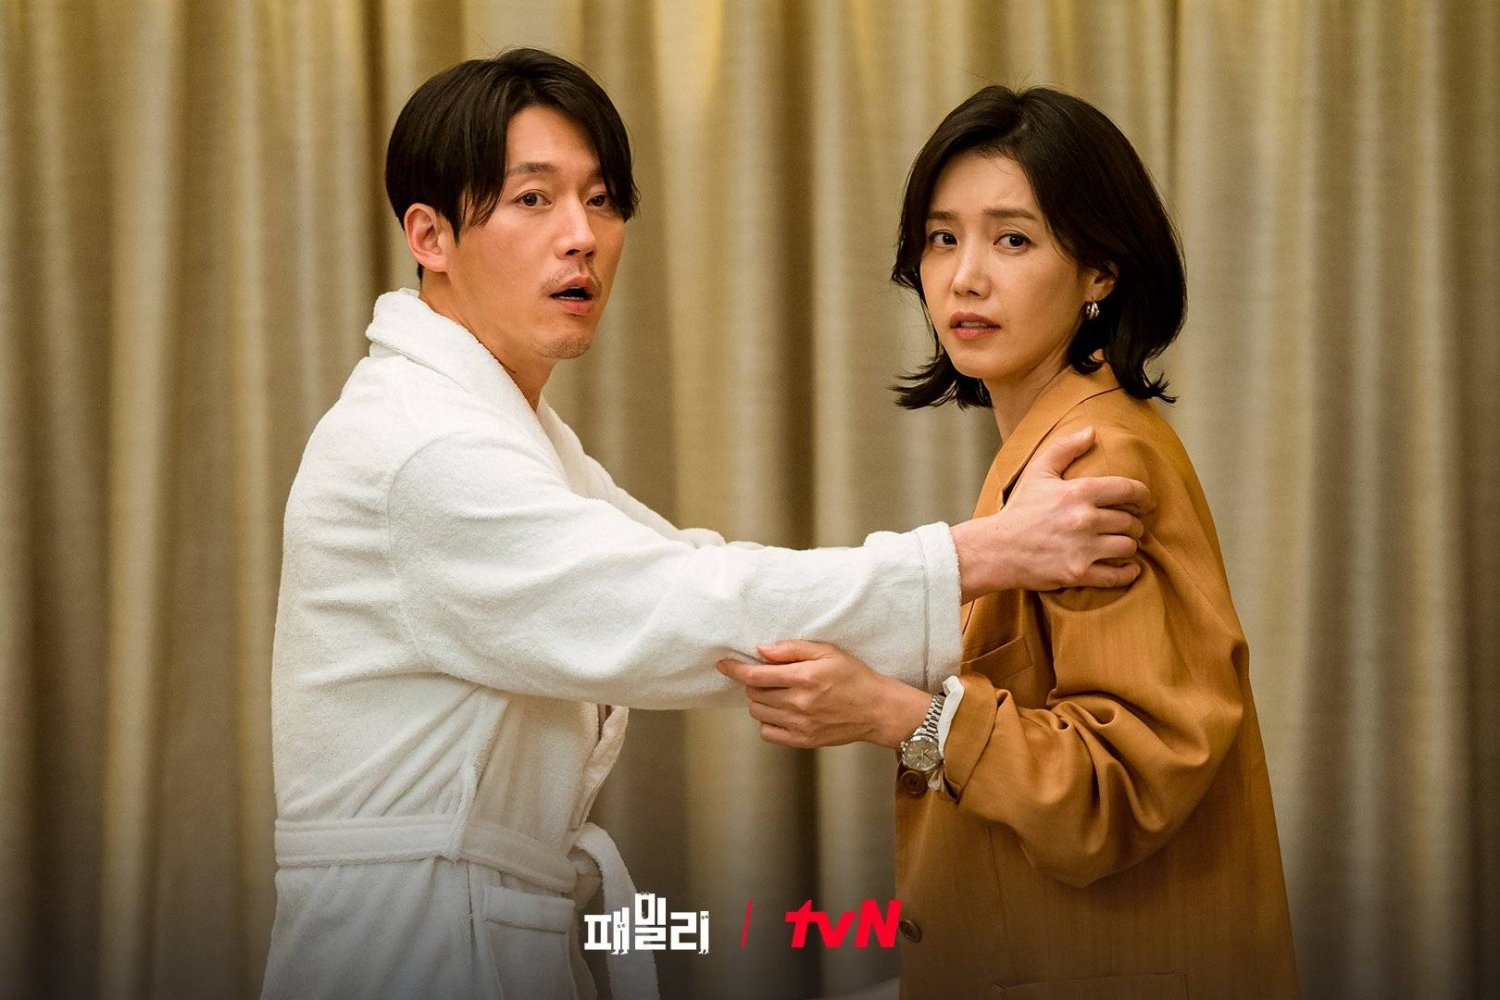 [Photos] New Stills Added for the Korean Drama 'Family The Unbreakable